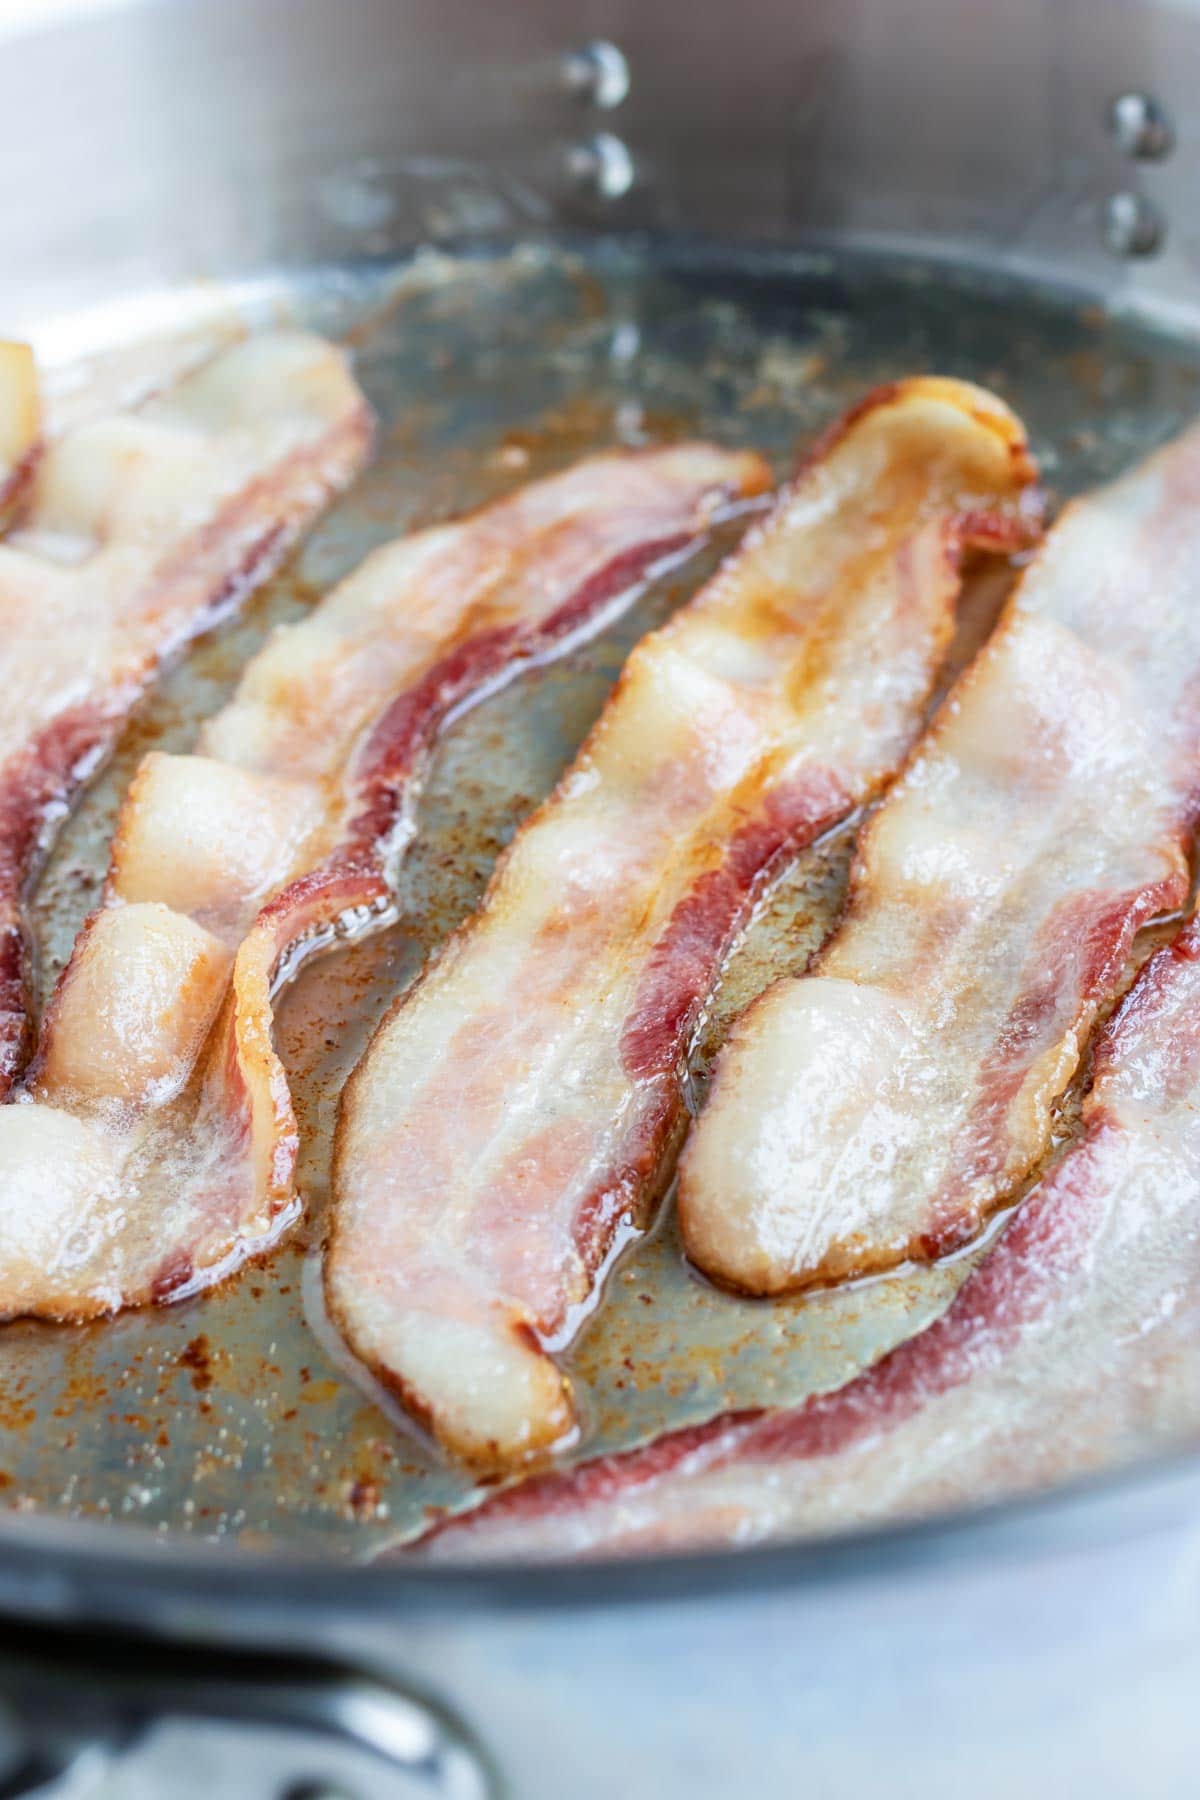 Bacon being cooked in a skillet for a healthy scallop recipe.